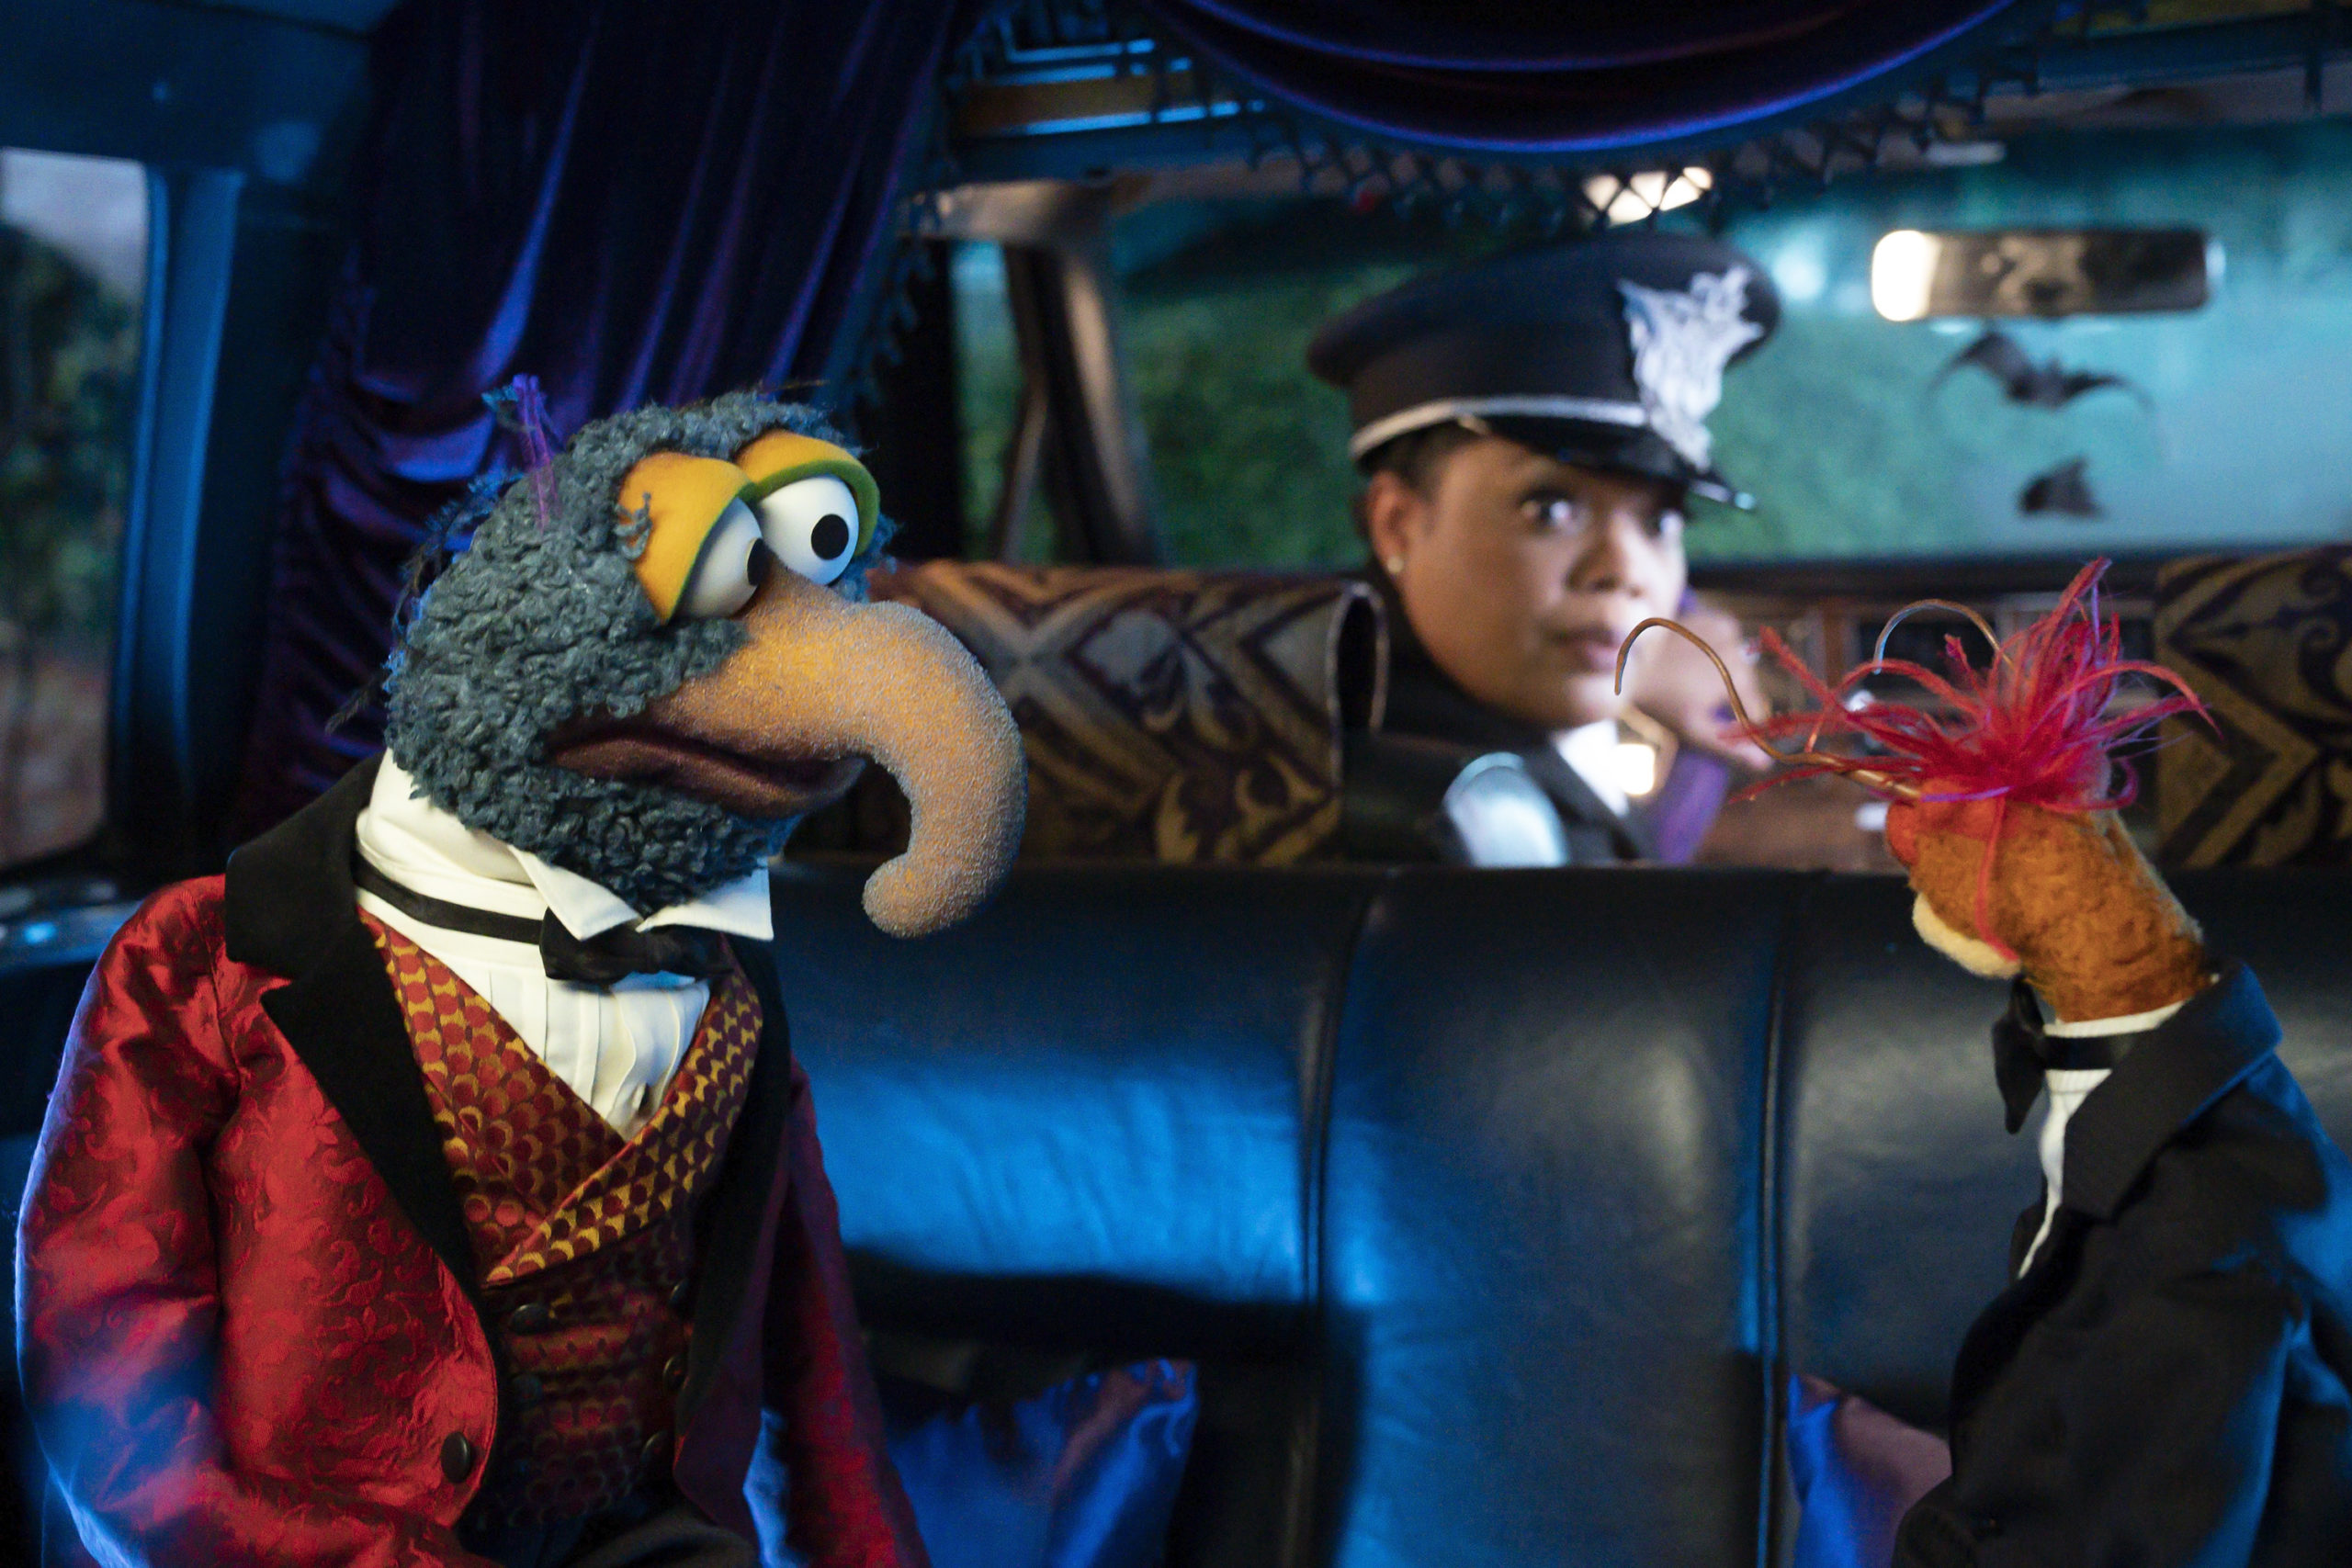 Gonzo in Lead Role With Yvette Nicole Brown in Driver’s Seat for Muppets Haunted Mansion [Exclusive Interview]